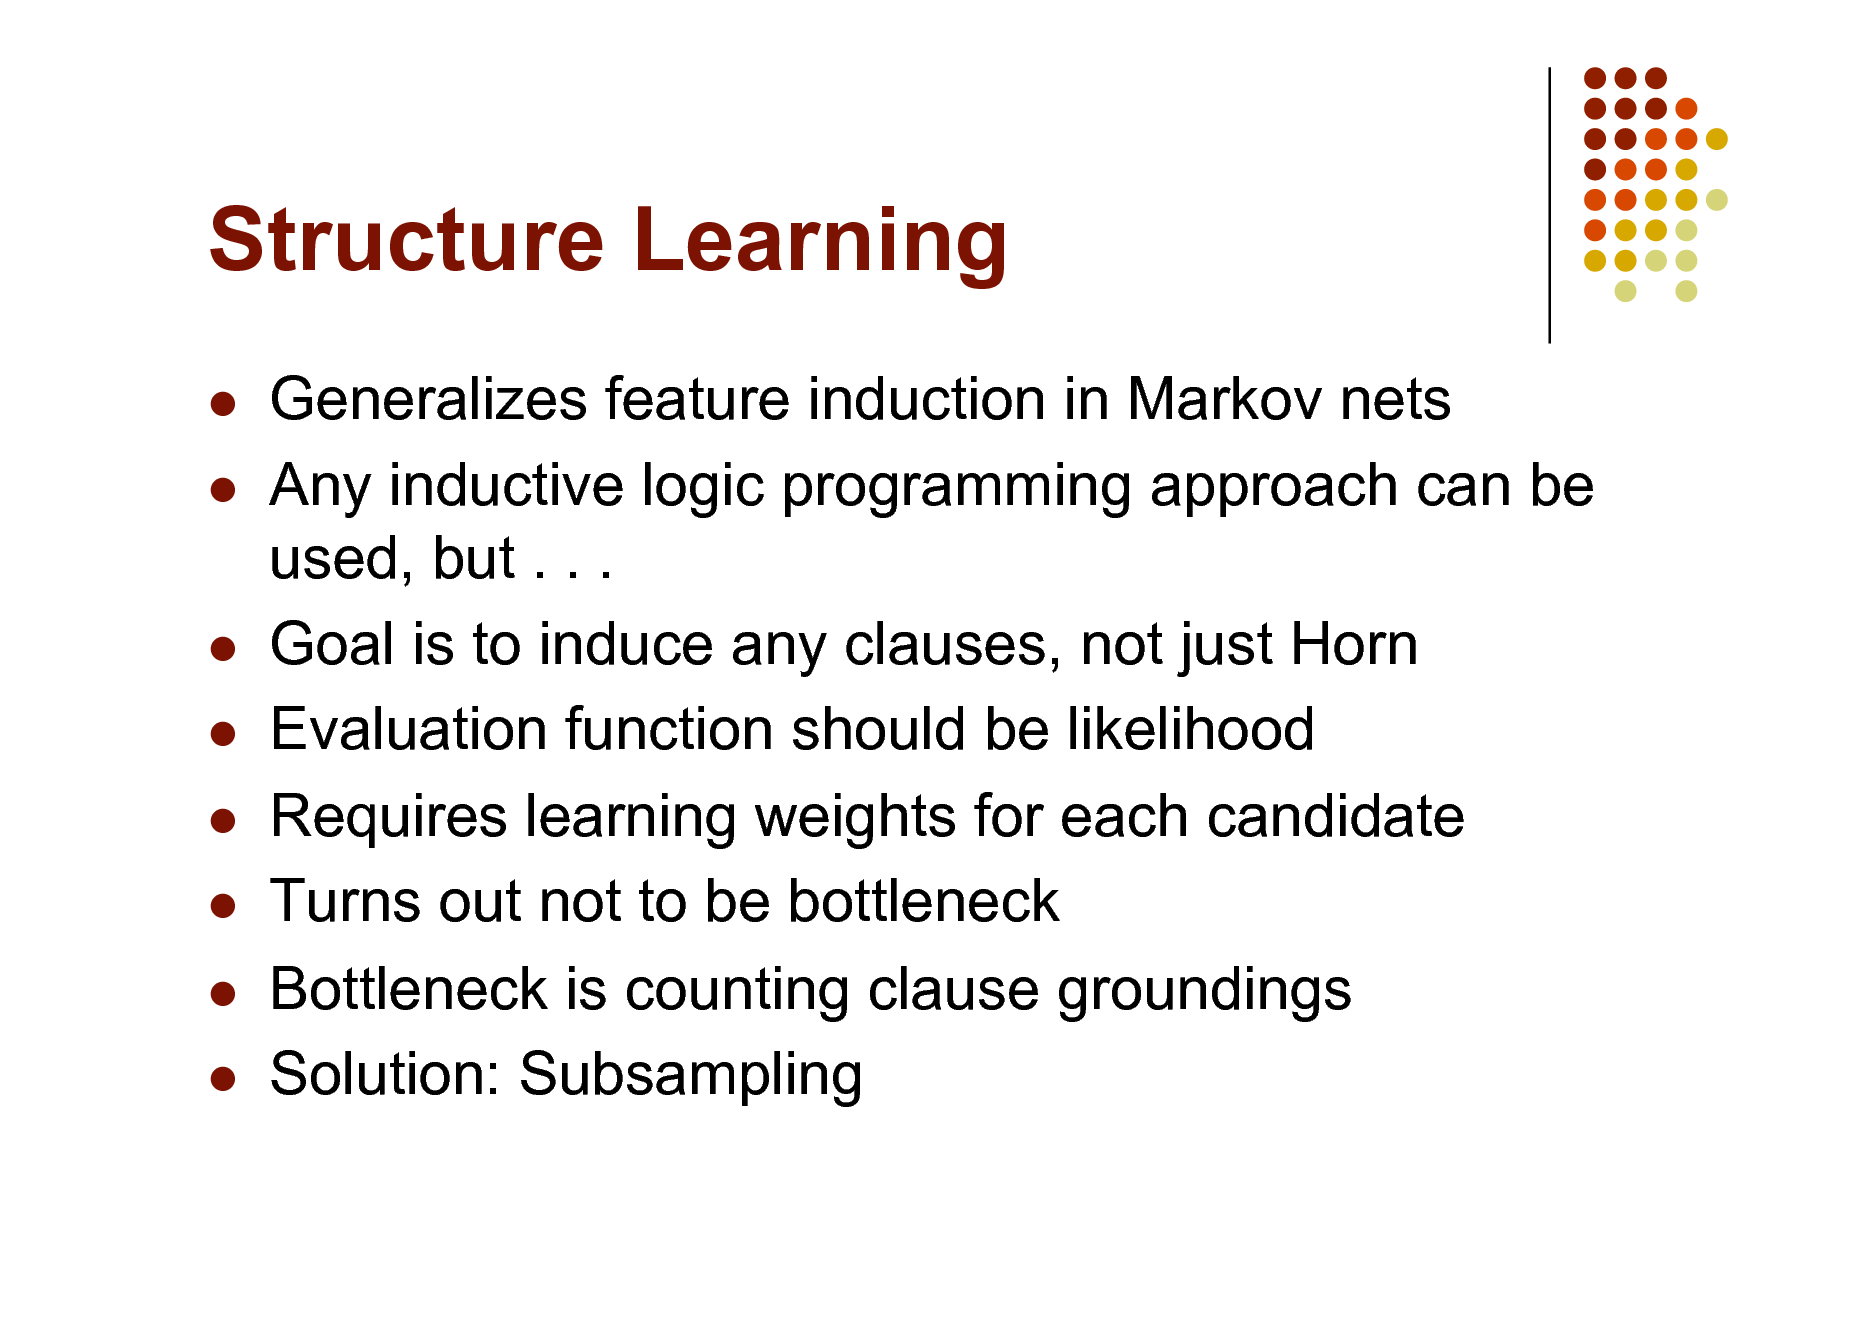 Slide: Structure Learning
 

     

Generalizes feature induction in Markov nets Any inductive logic programming approach can be used, but . . . Goal is to induce any clauses, not just Horn Evaluation function should be likelihood Requires learning weights for each candidate Turns out not to be bottleneck Bottleneck is counting clause groundings Solution: Subsampling

